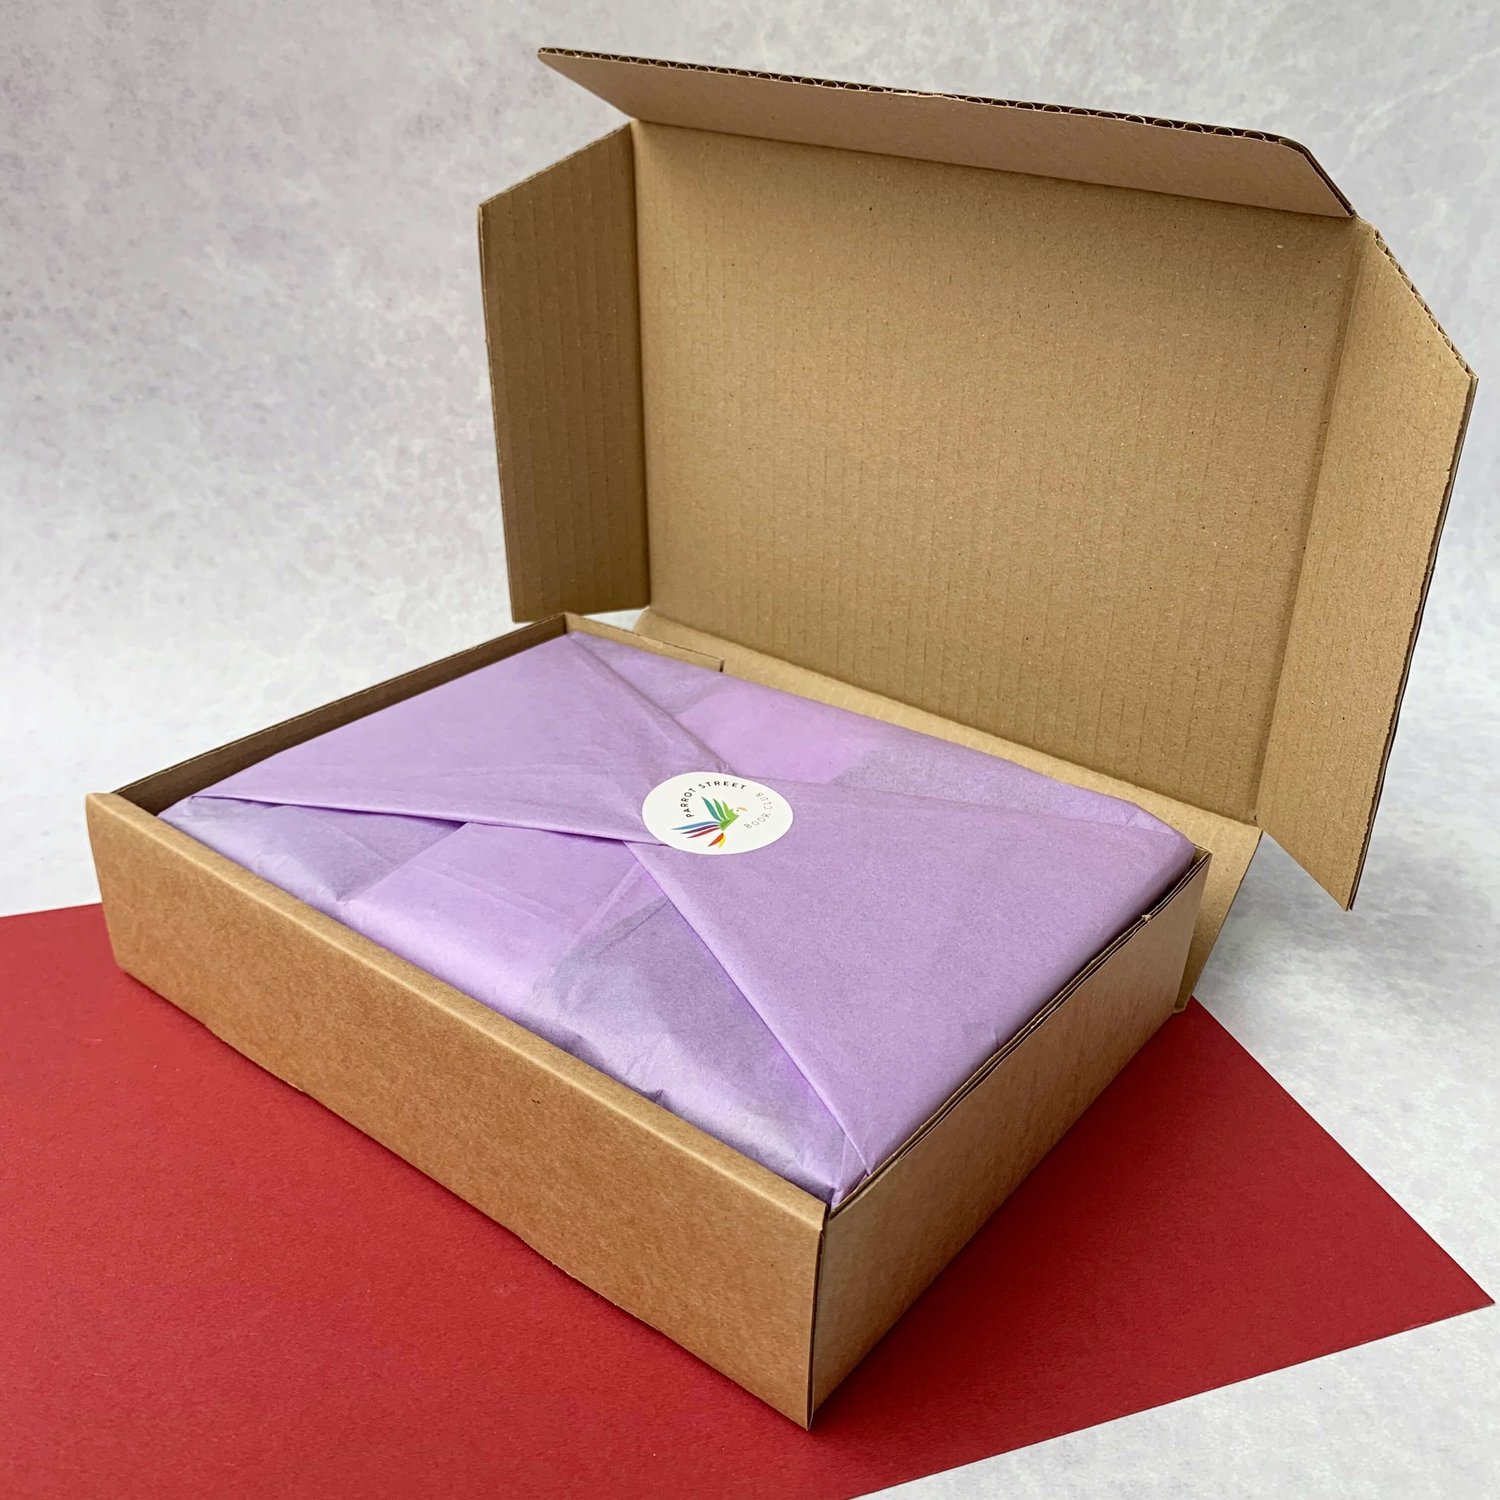 Wrapped gift set inside a recyclable cardboard mailing box